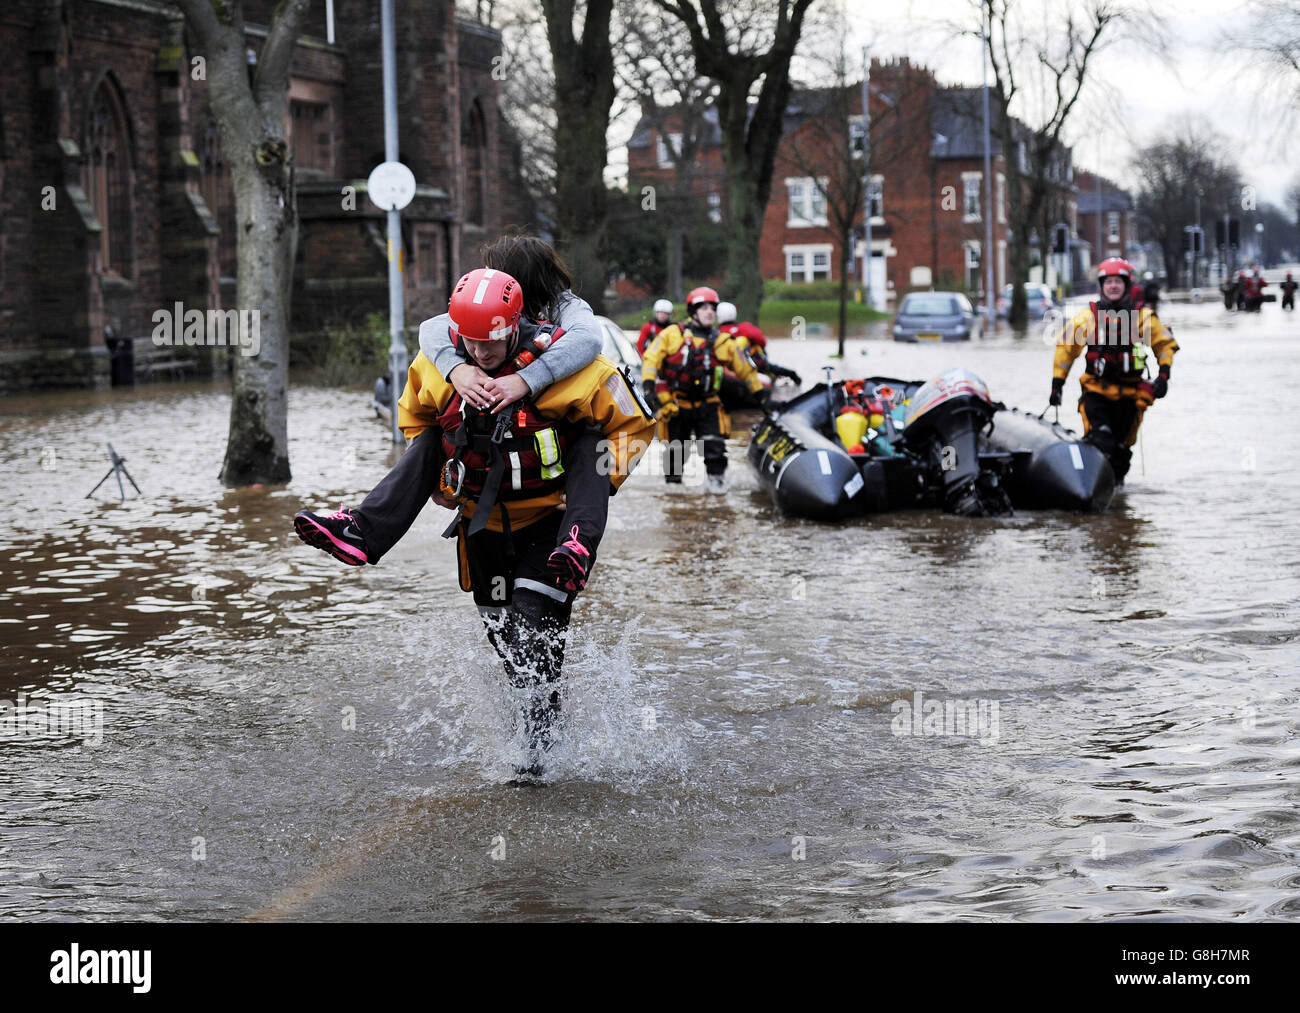 Fire and Rescue teams continue their work to bring people out of flooded homes in Carlisle following heavy rains over he weekend. Stock Photo